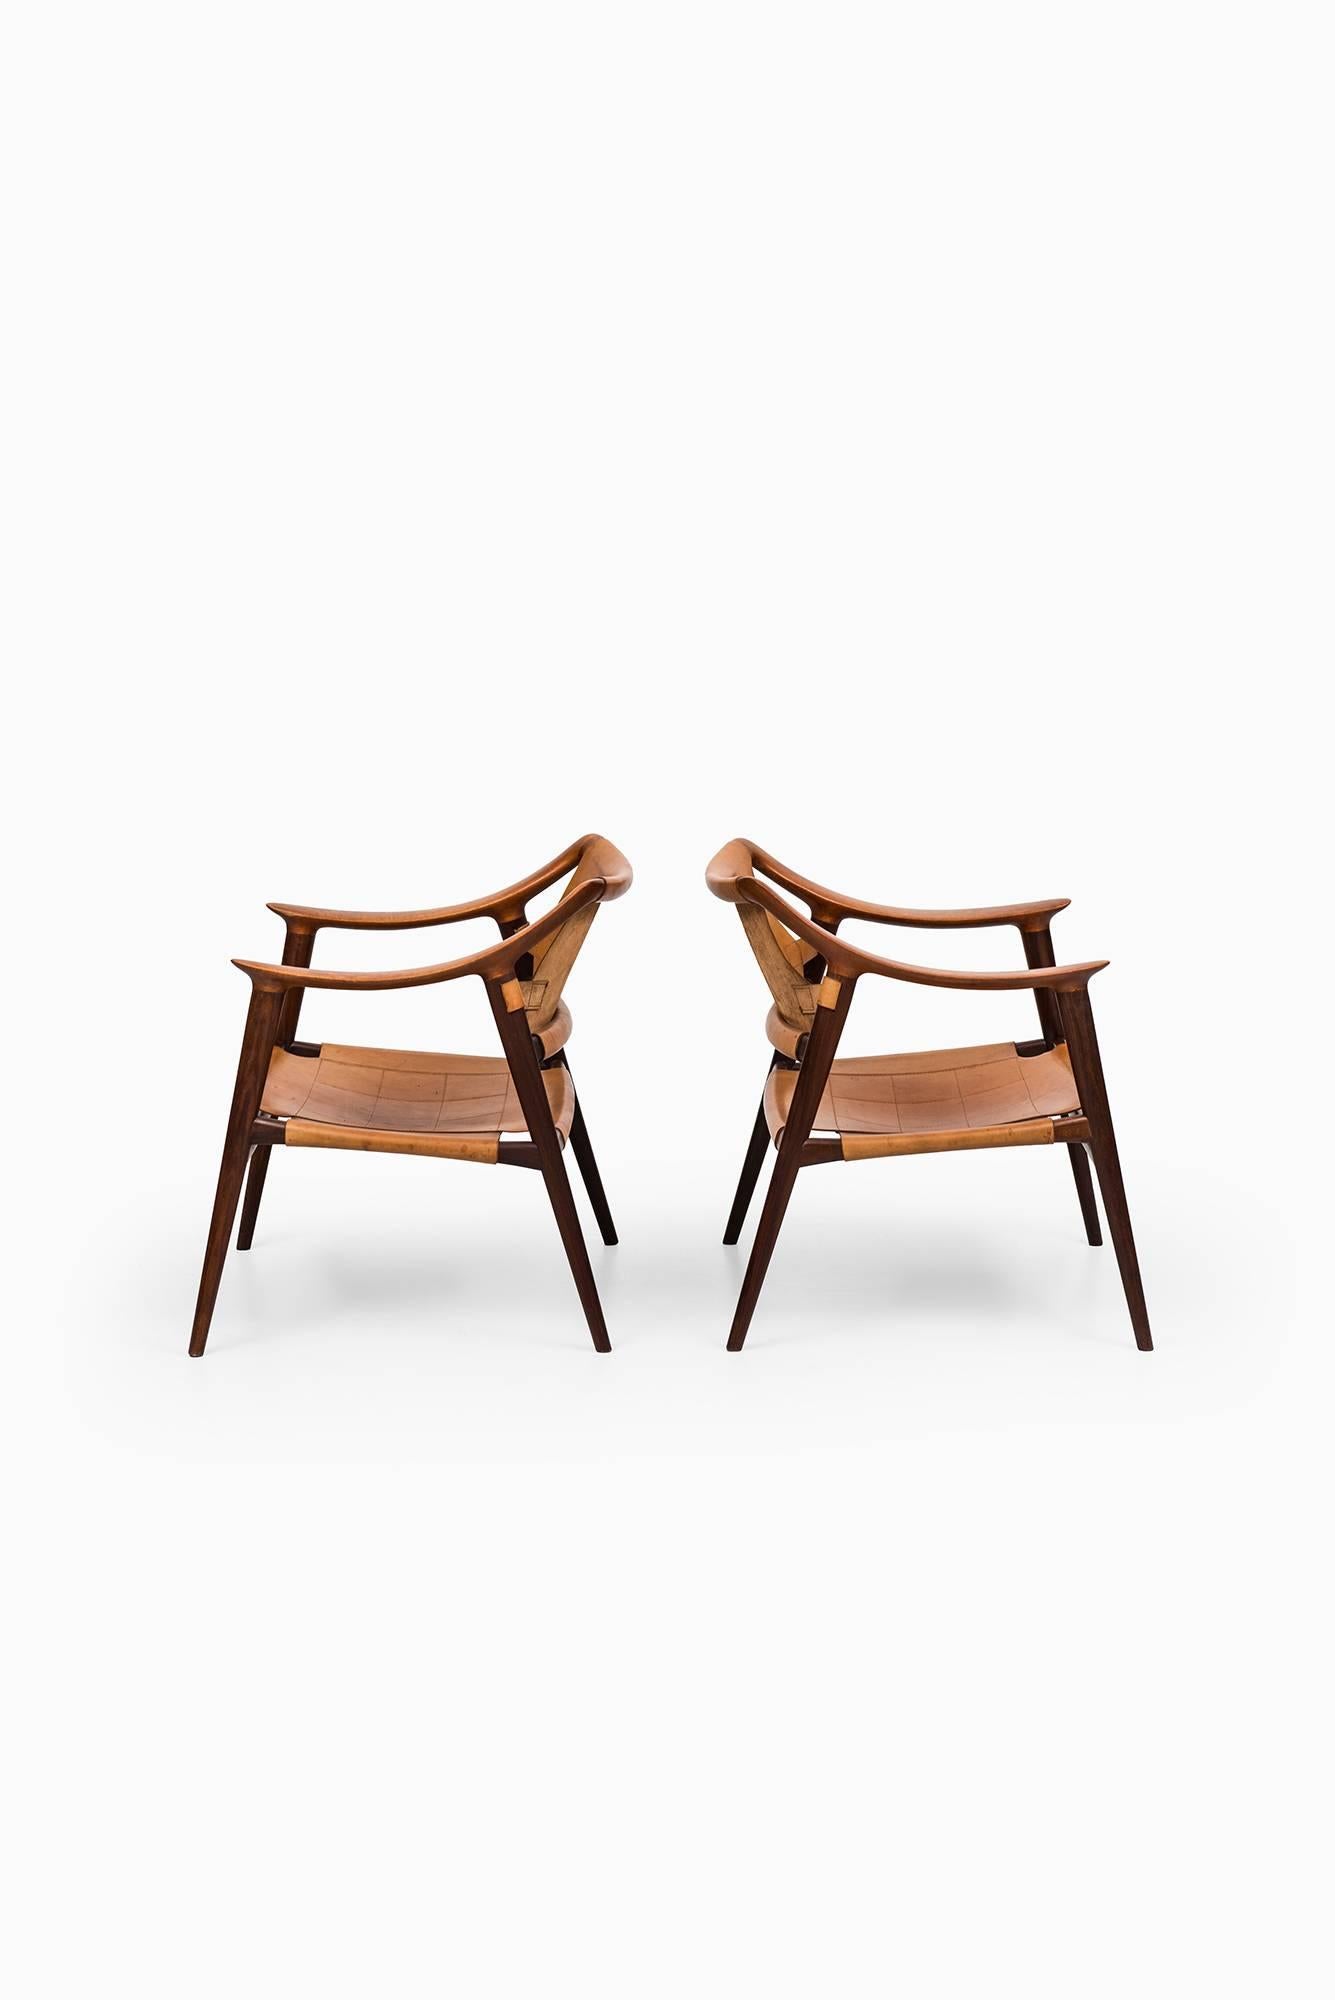 Mid-20th Century Rolf Rastad & Adolf Relling Bambi Easy Chairs by Gustav Bahus in Norway